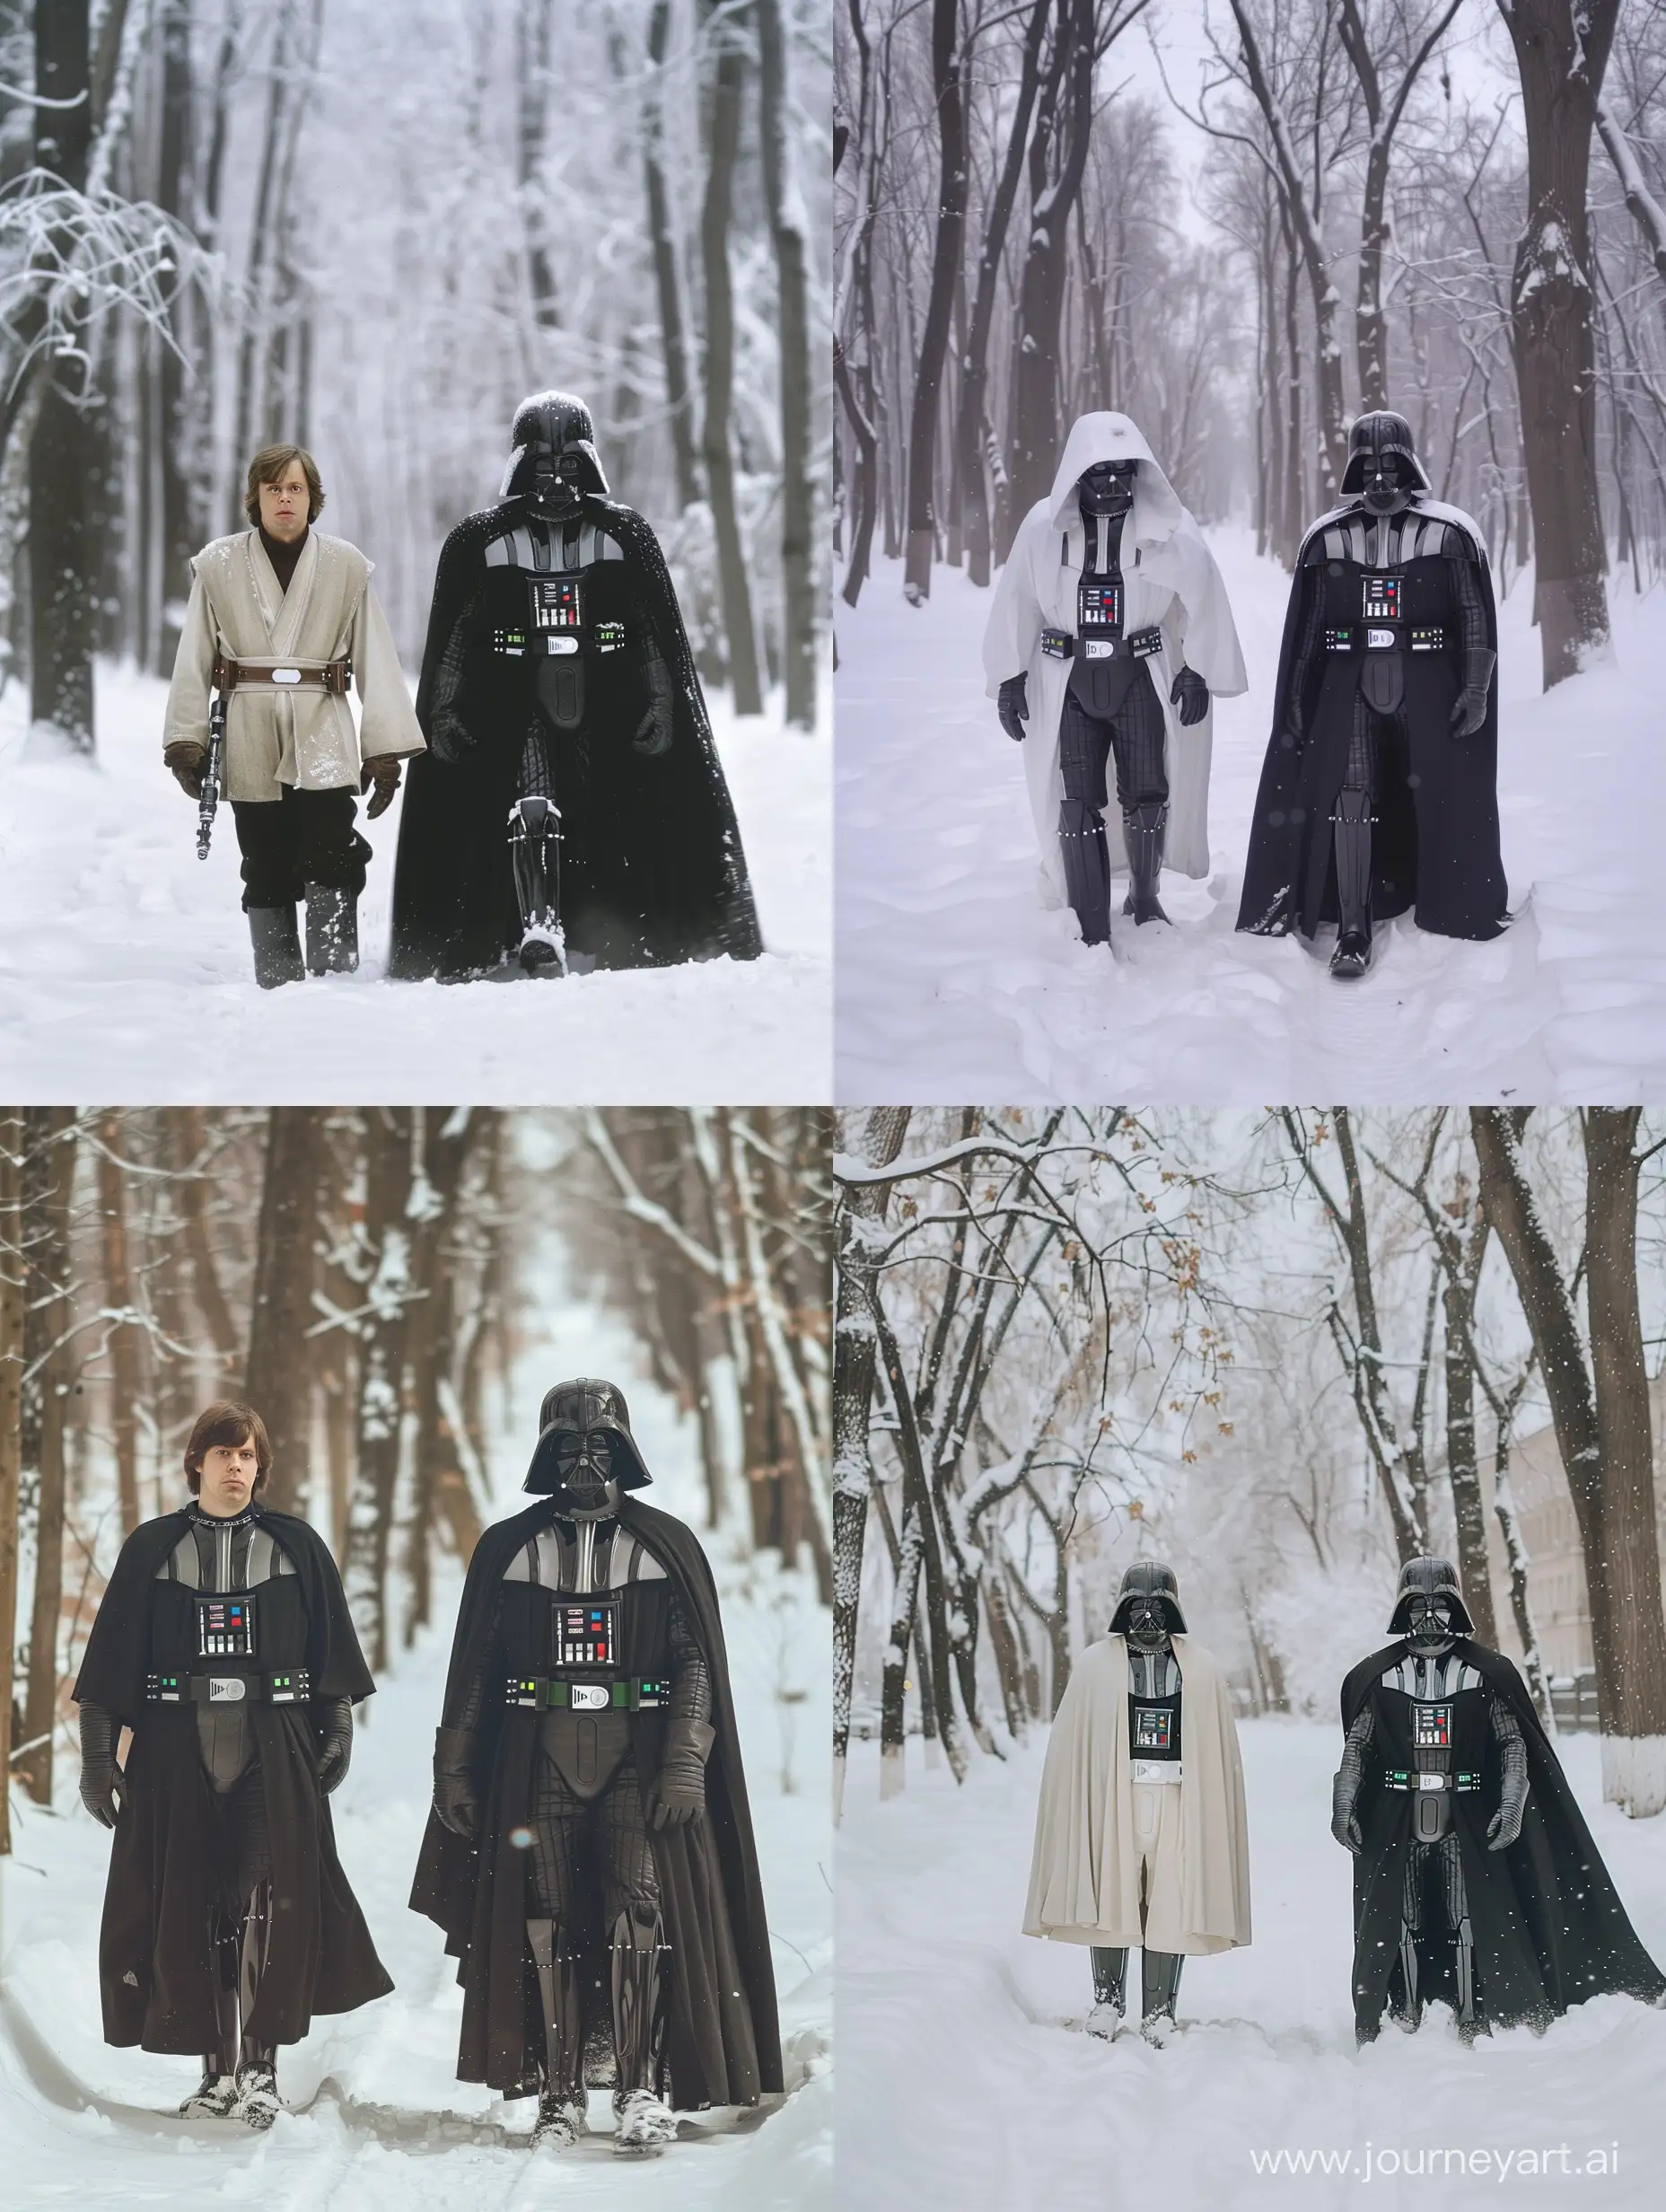 Luke Skywalker and Darth Vader got lost in Moscow's winter